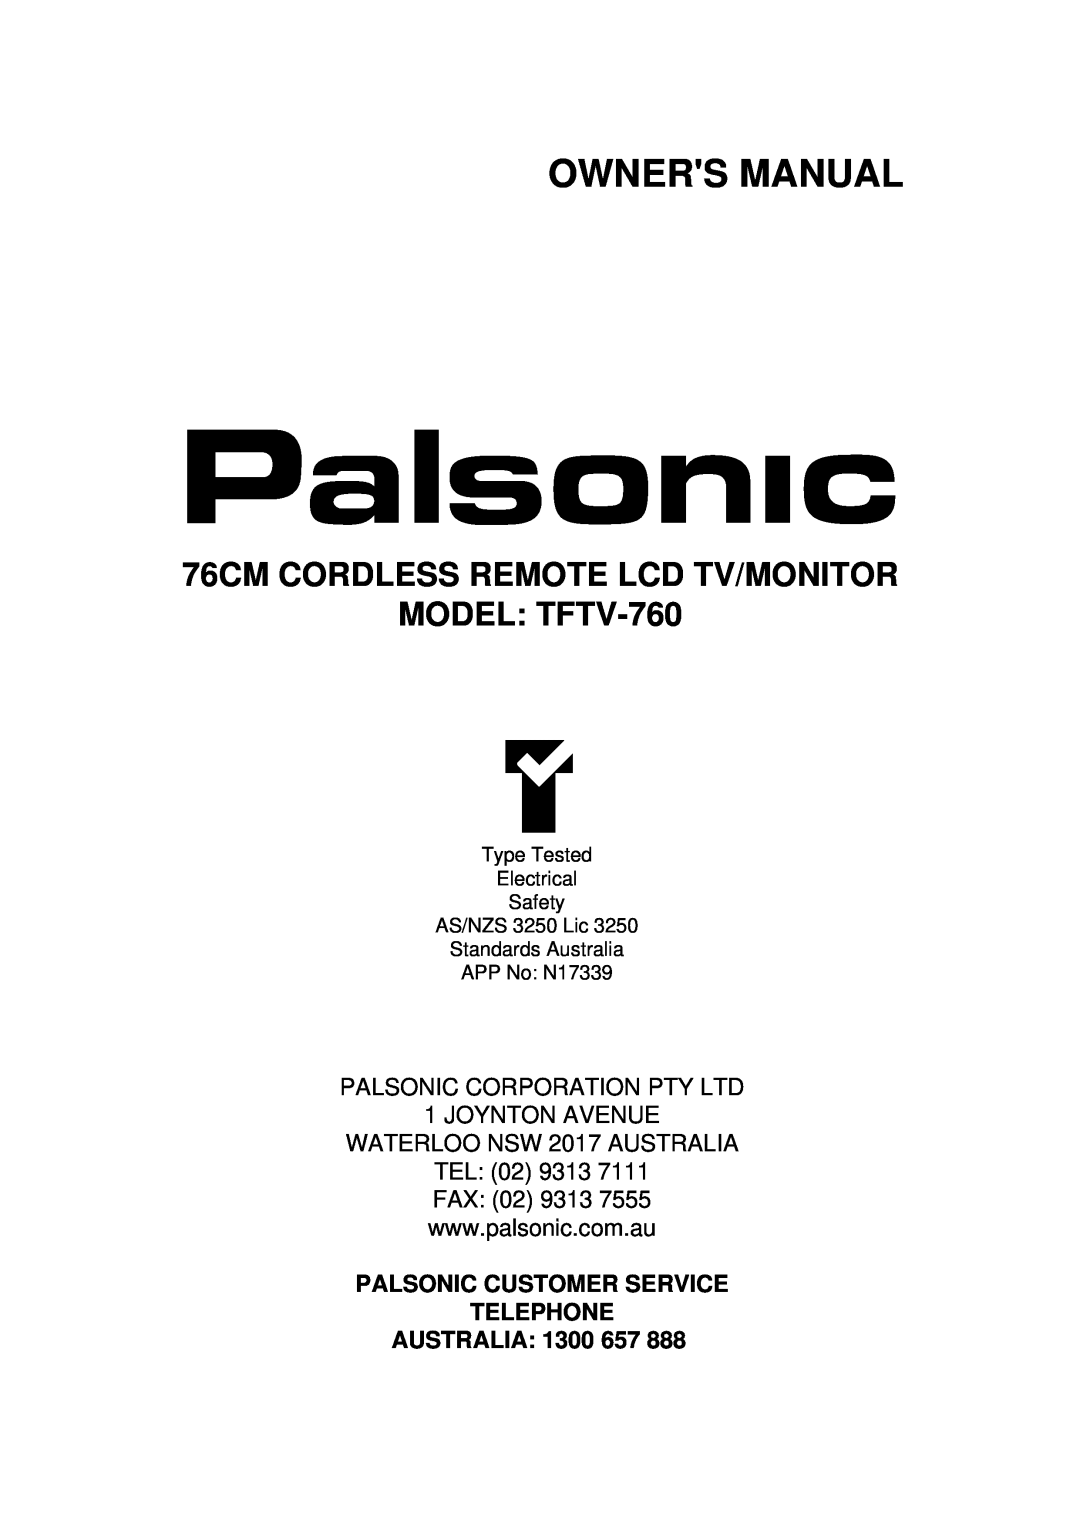 Palsonic owner manual Owners Manual, 76CM CORDLESS REMOTE LCD TV/MONITOR MODEL TFTV-760 